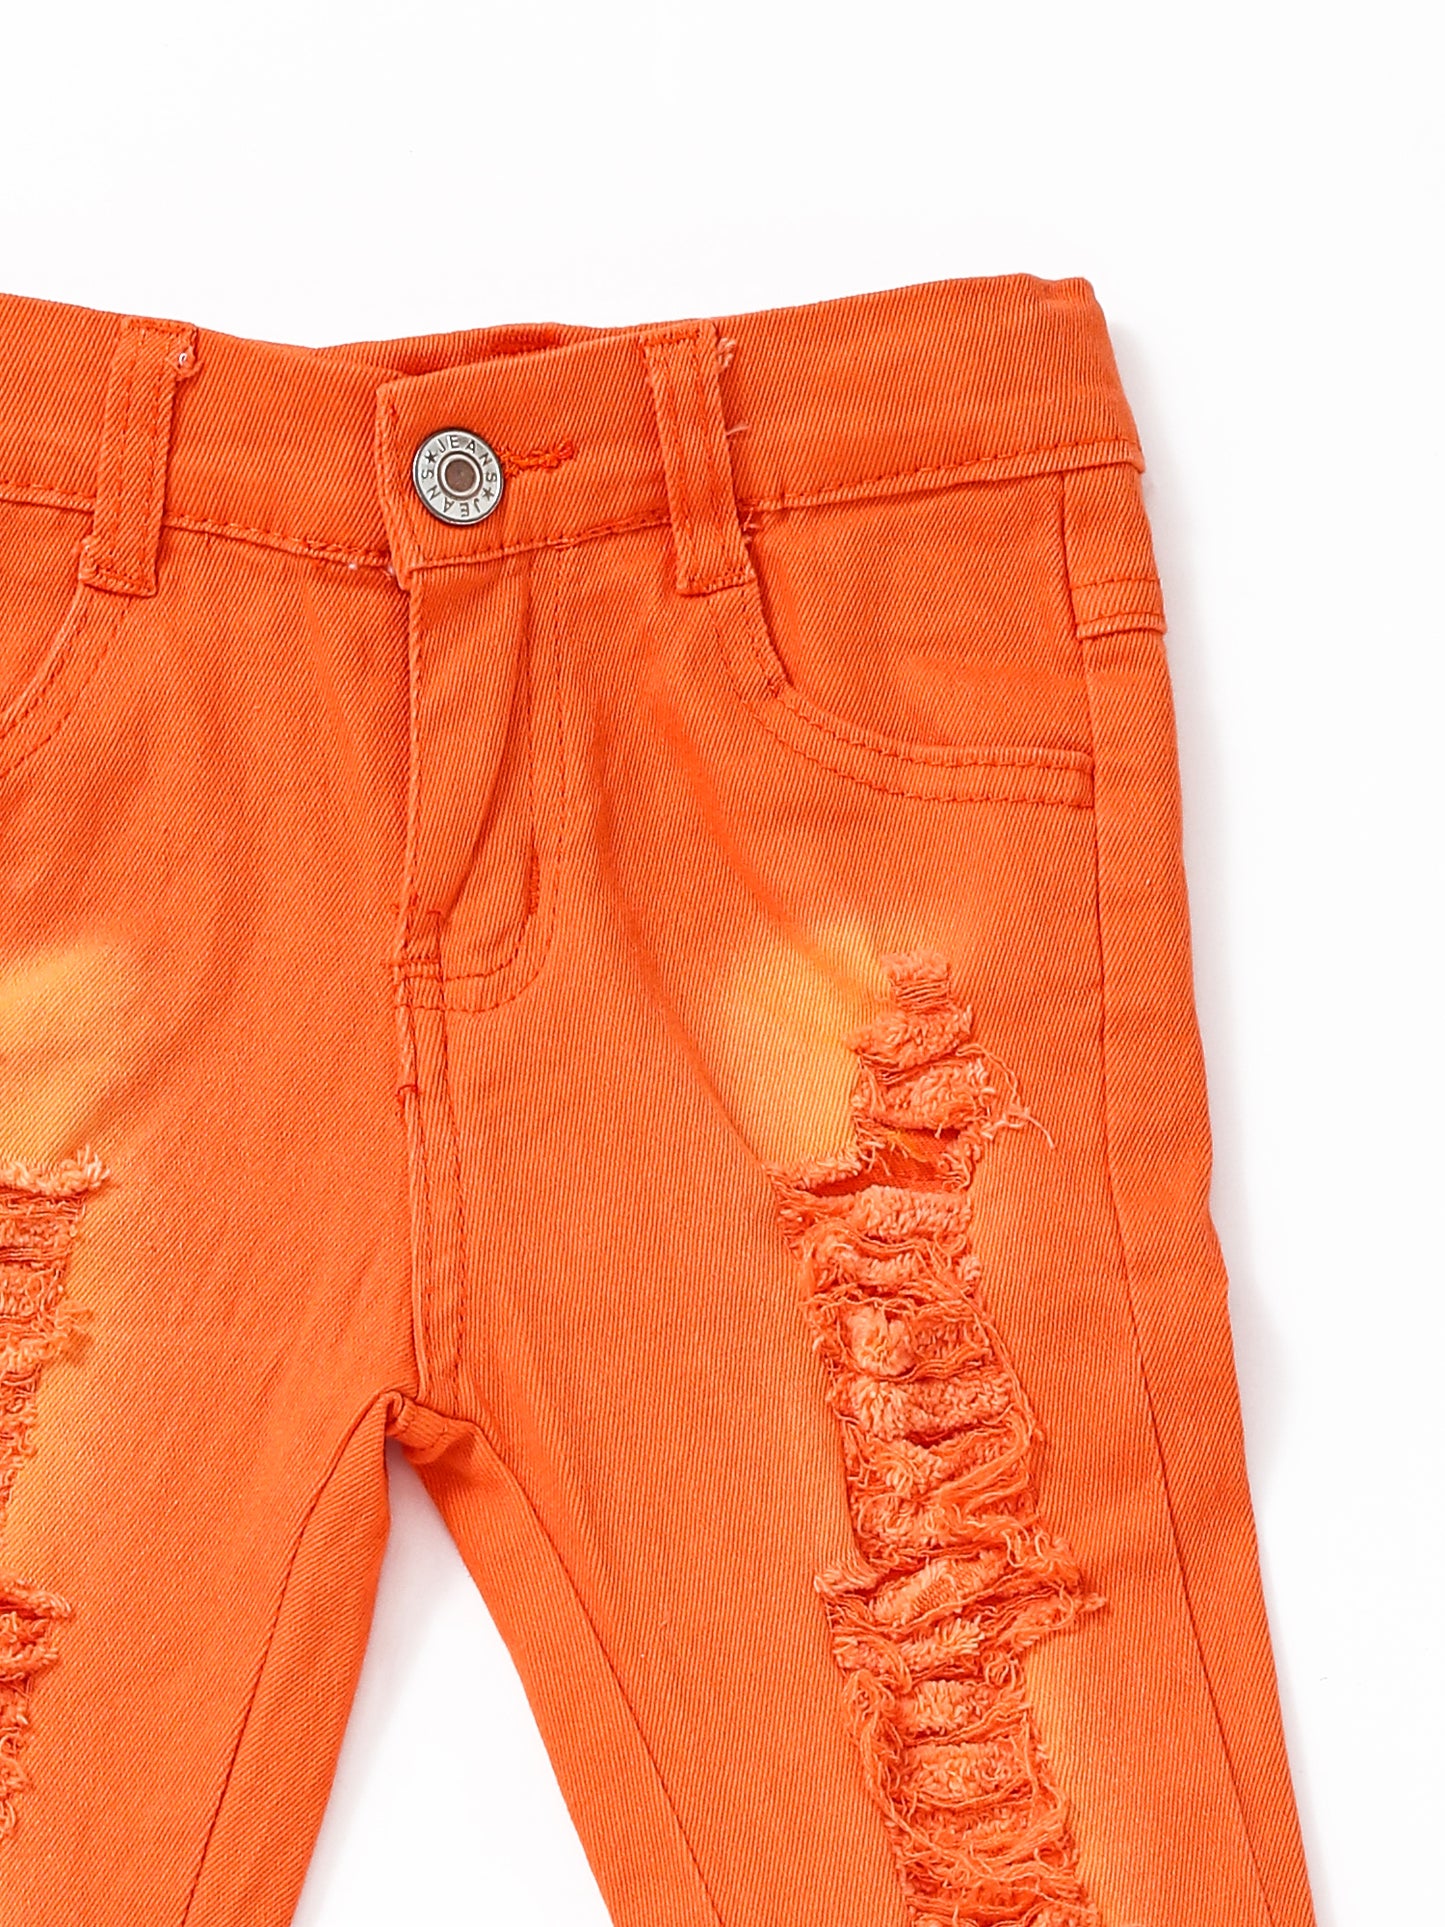 Orange Distressed Double Layer Girls Jeans